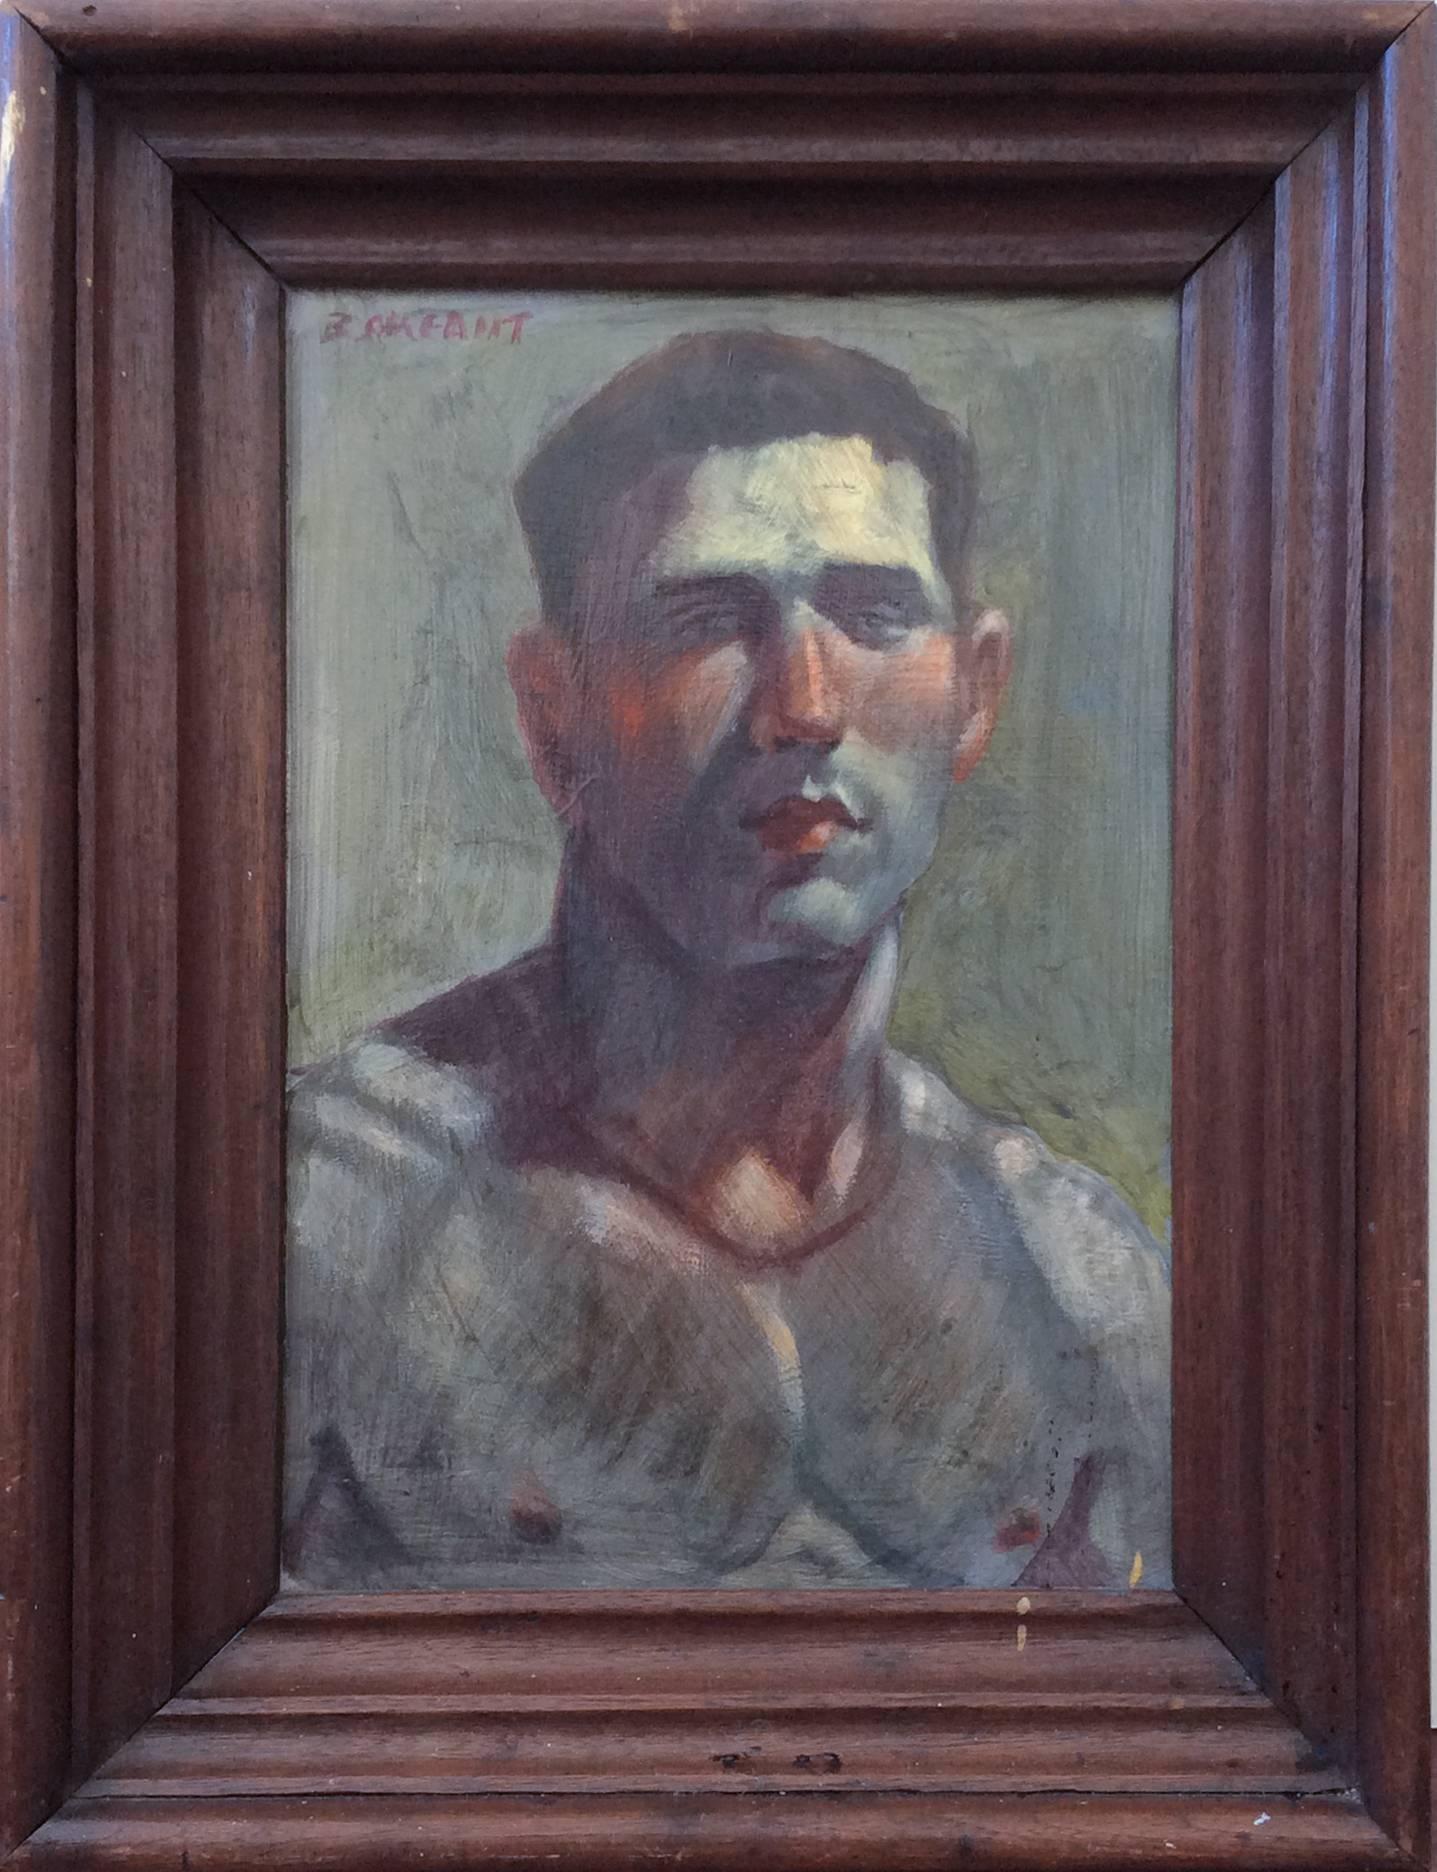 Portrait of a Male Figure (Original Oil by Bruce Sargeant aka Mark Beard)
13.5 x 9.5 inches, oil on canvas
Vintage brown wooden frame measures 18.5 x 14.5 x 2 inches
signed "B. Sargeant" in upper left hand corner

This is small, contemporary